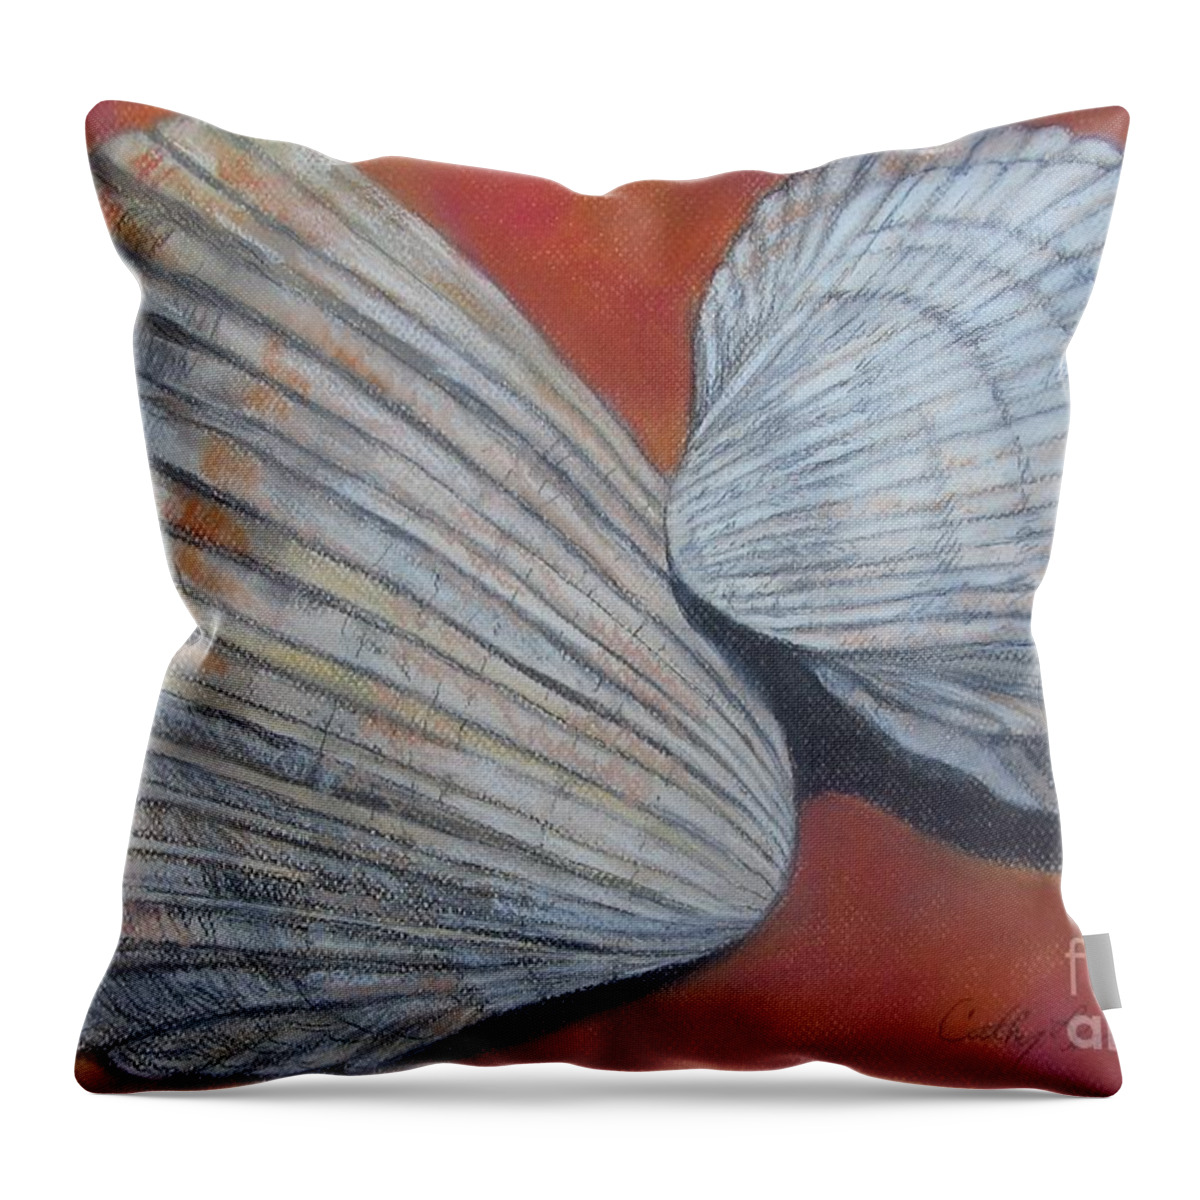 Cockle Throw Pillow featuring the pastel Van Hyning's Cockle Shells by Cathy Lindsey